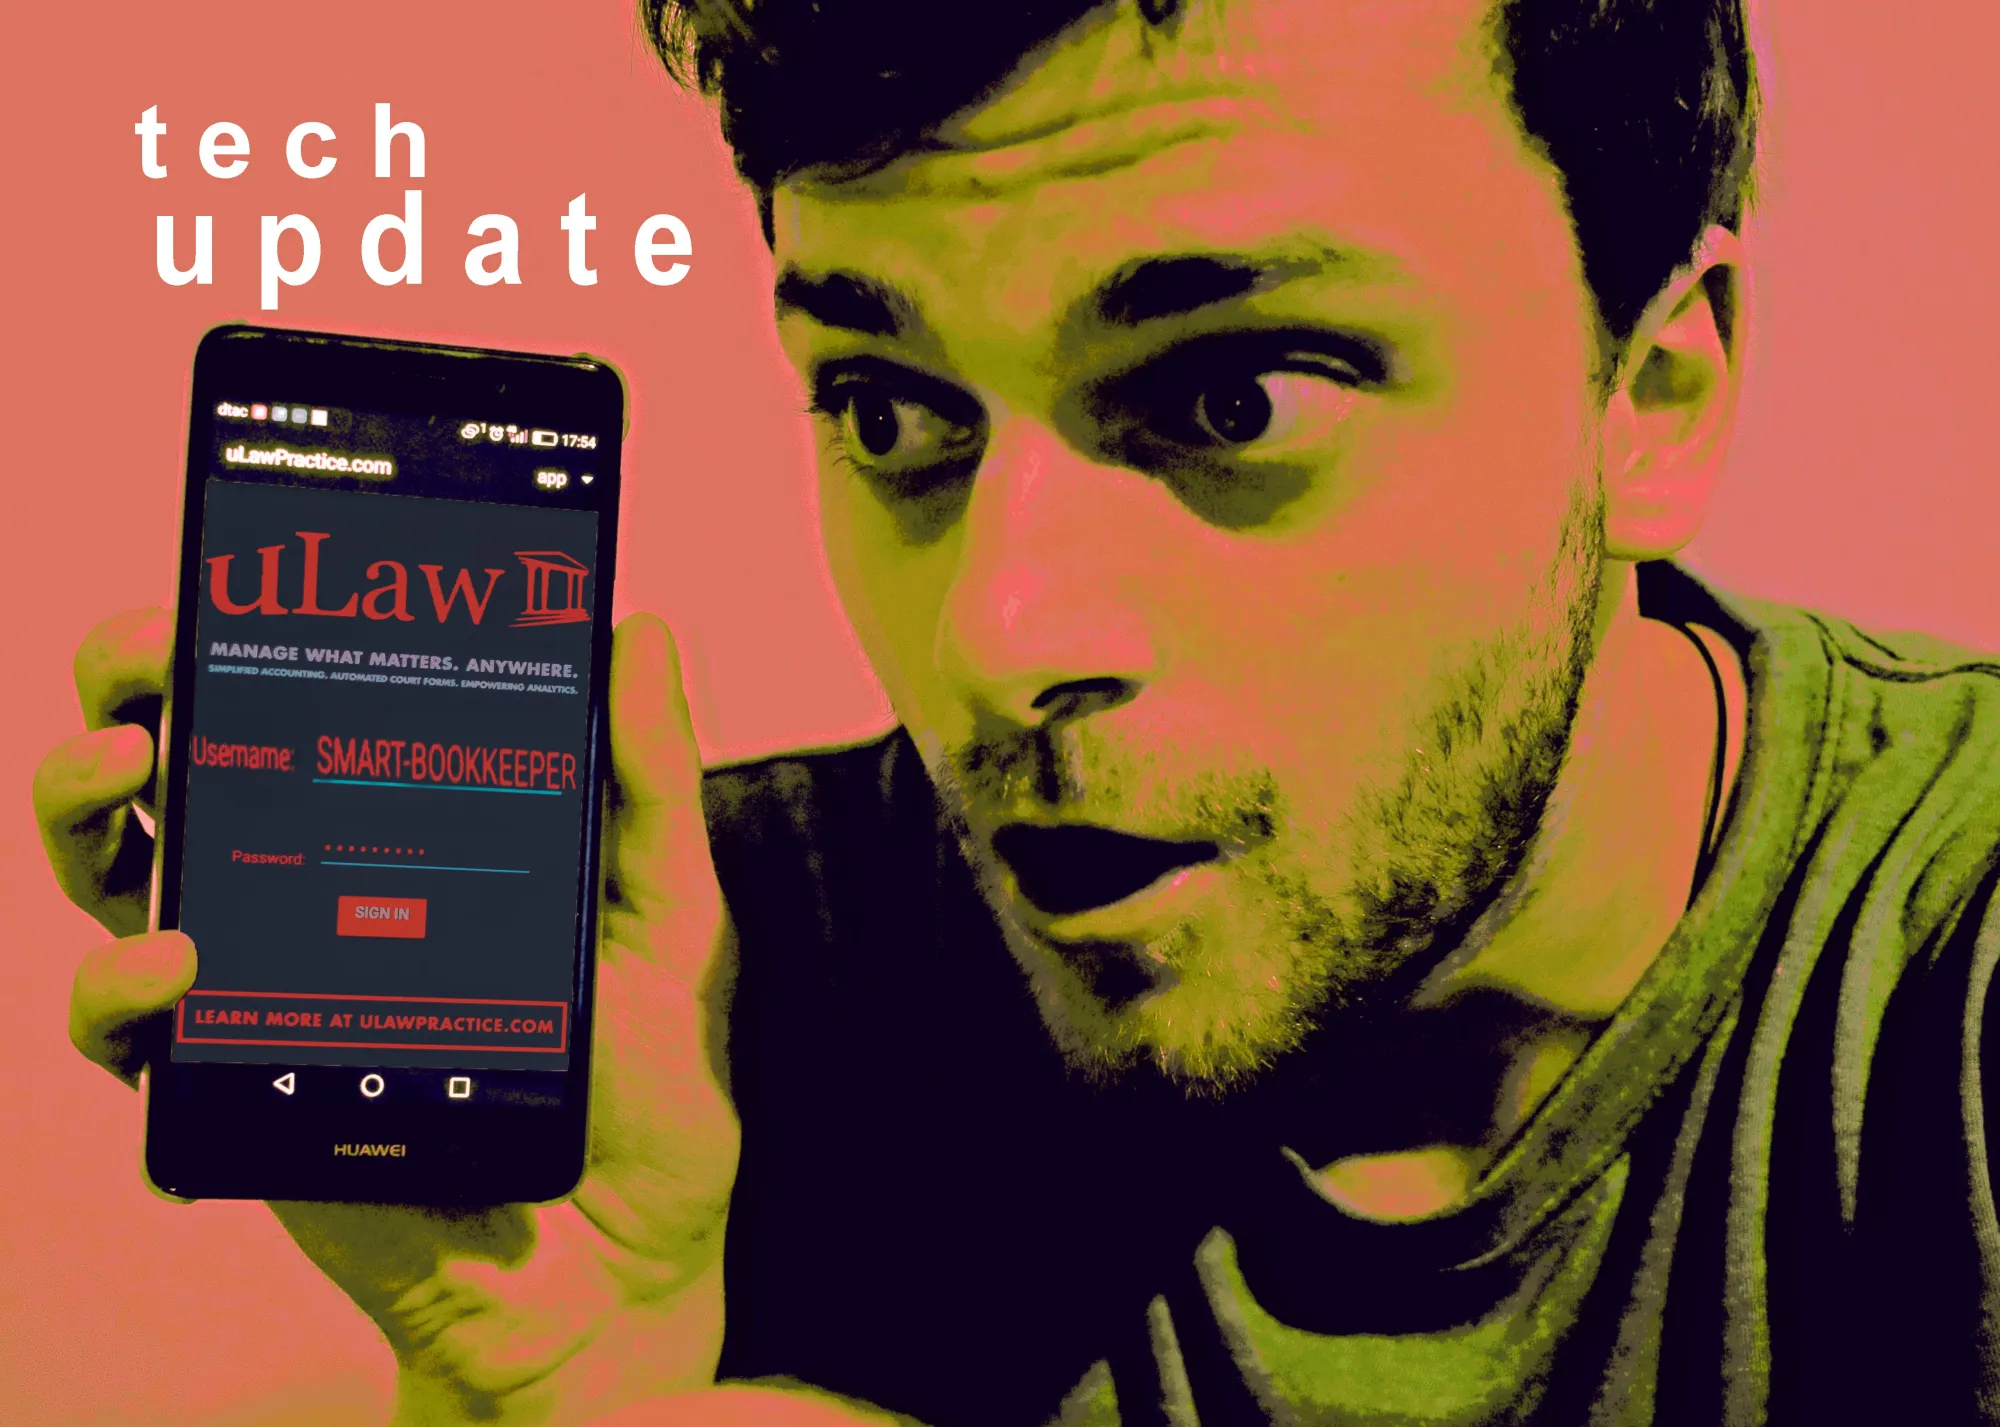 Nov 9 uLaw tech update sees new features in system